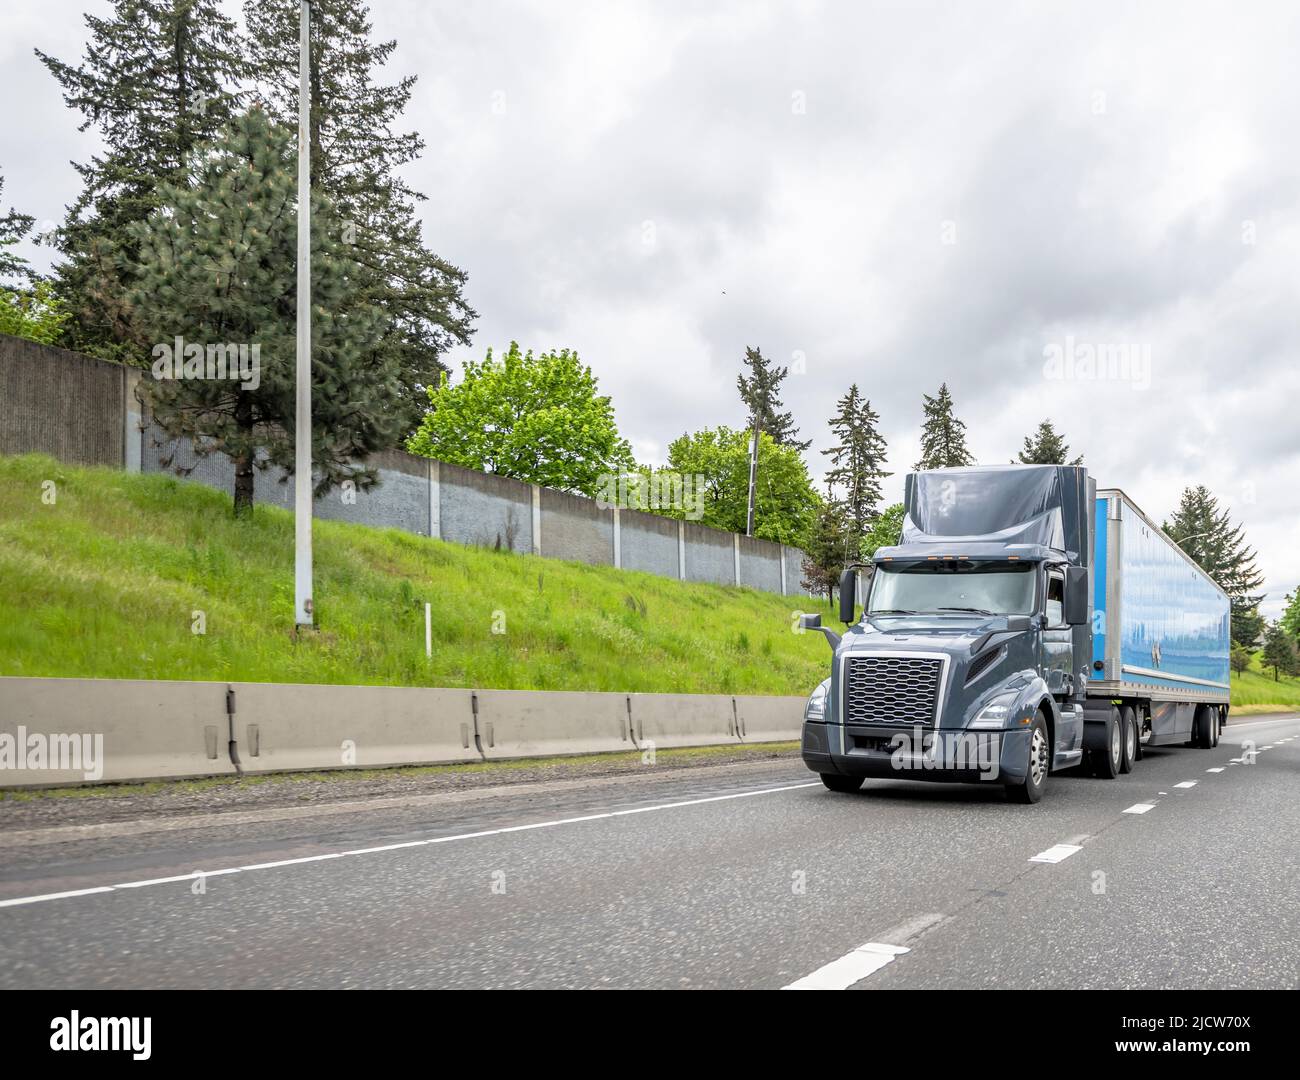 Loaded classic big rig industrial gray semi truck tractor transporting commercial cargo in dry van semi trailer running on the wide straight highway r Stock Photo